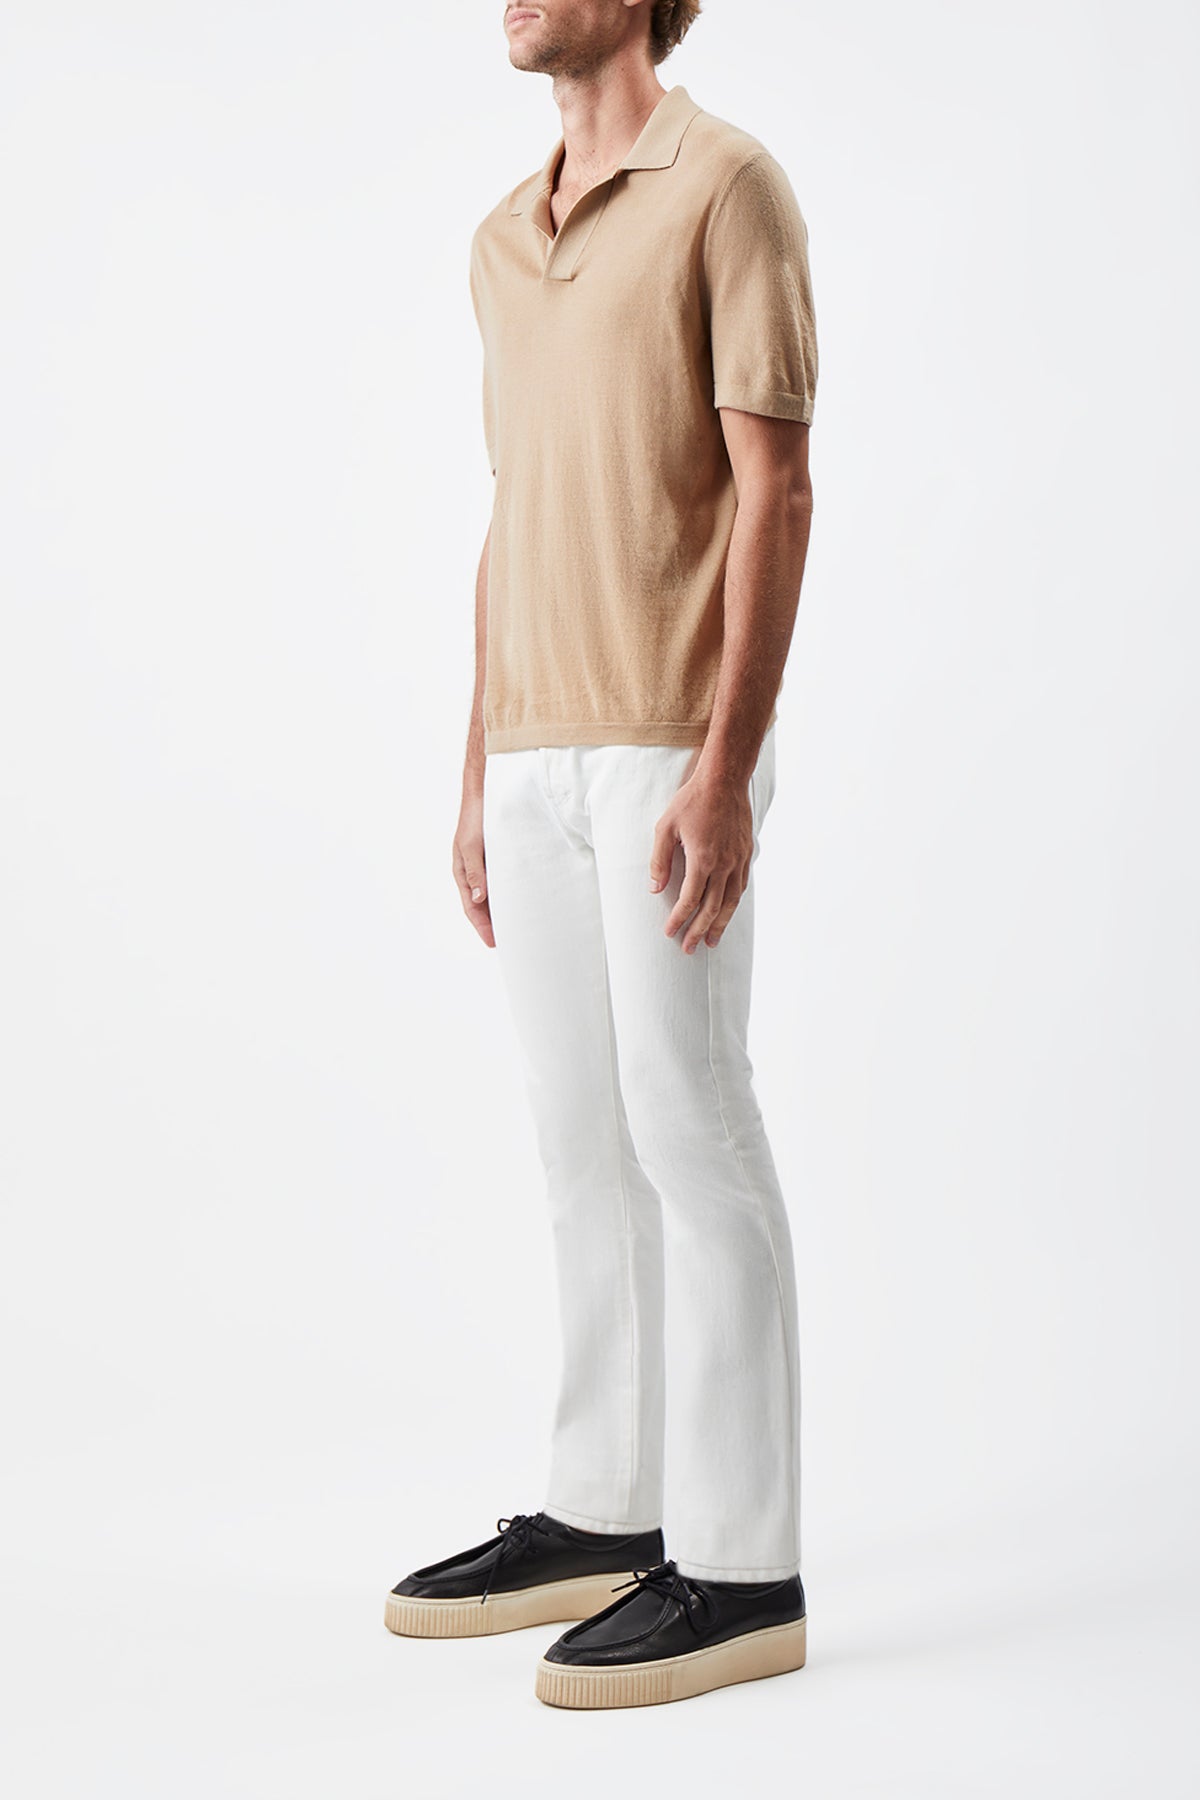 Stendhal Short Sleeve Polo in Cashmere